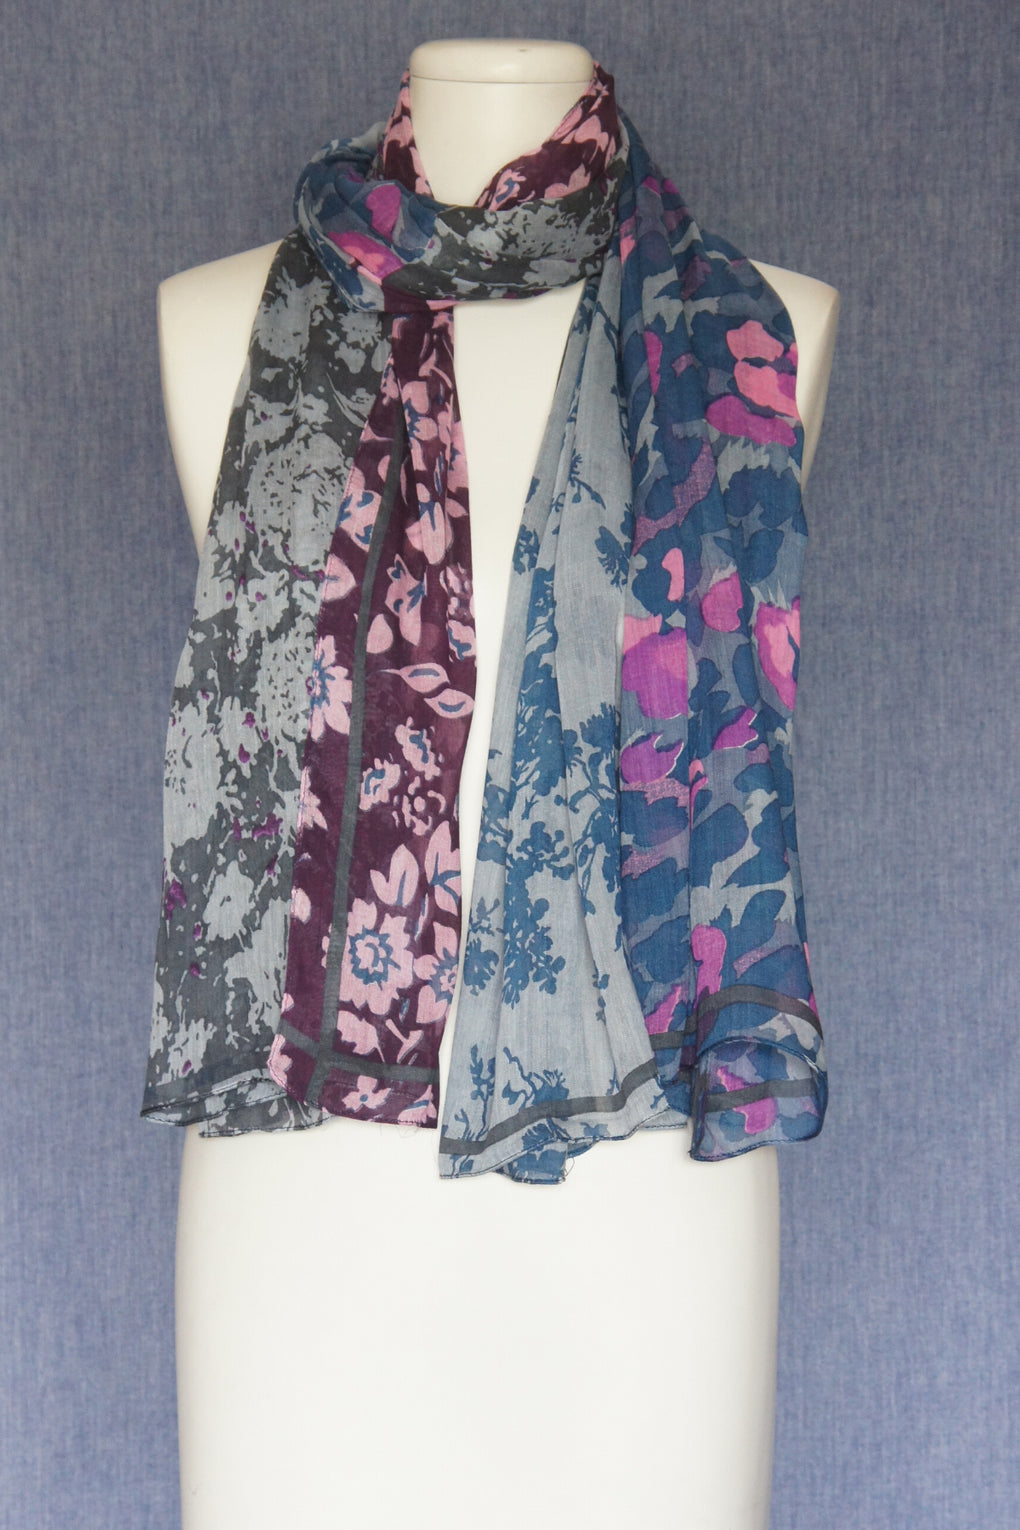 4 Patch Animal with Flowers Scarf (SE-1608)